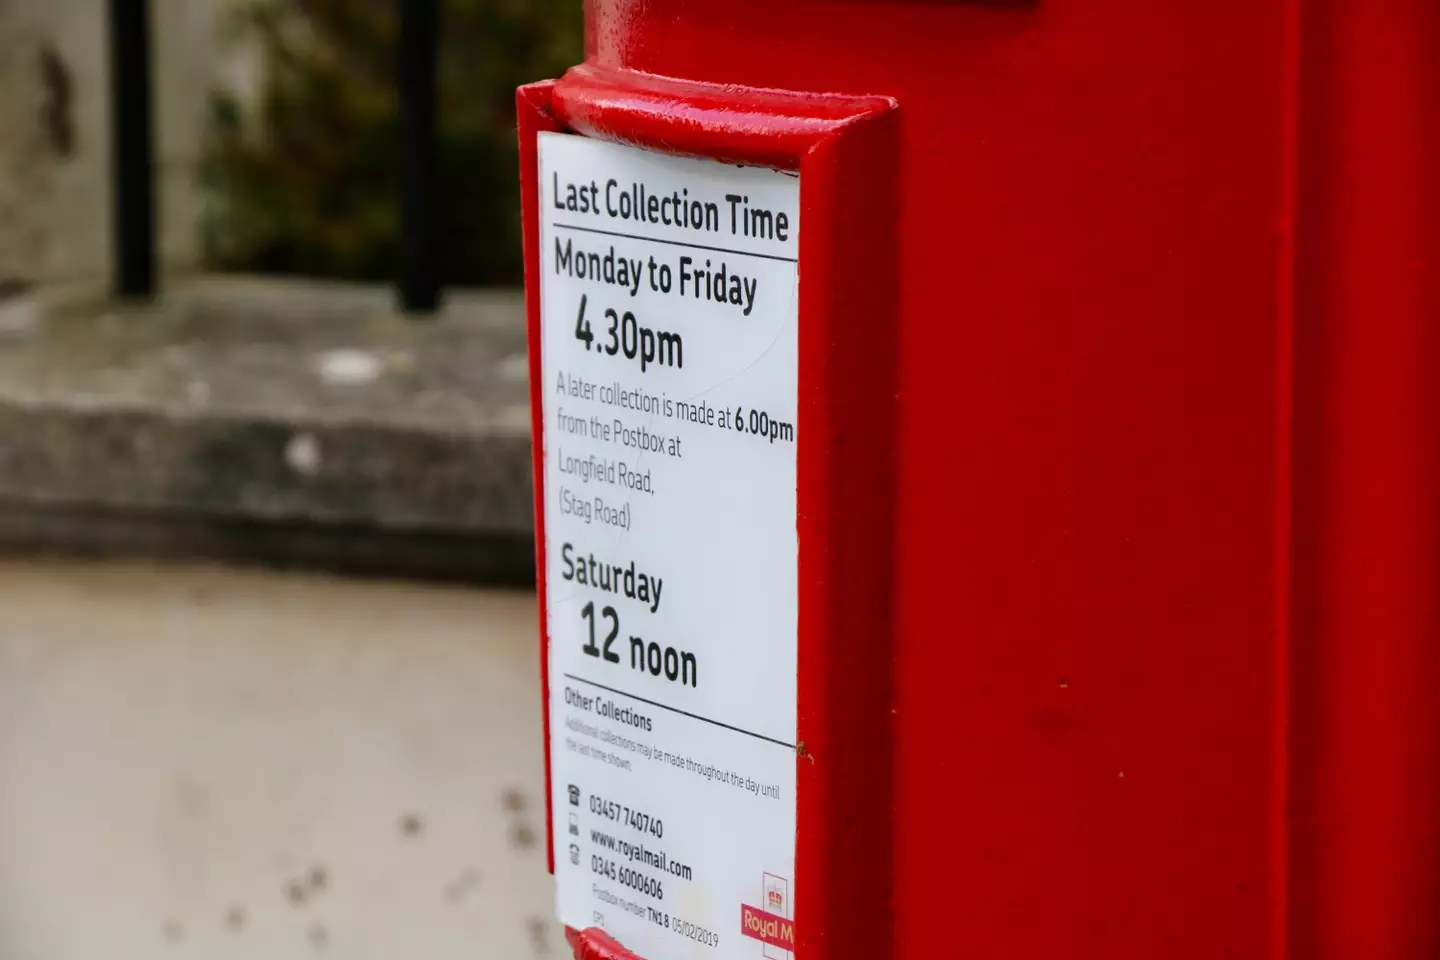 Locals have called for the postbox to be simply relocated to a safer location.